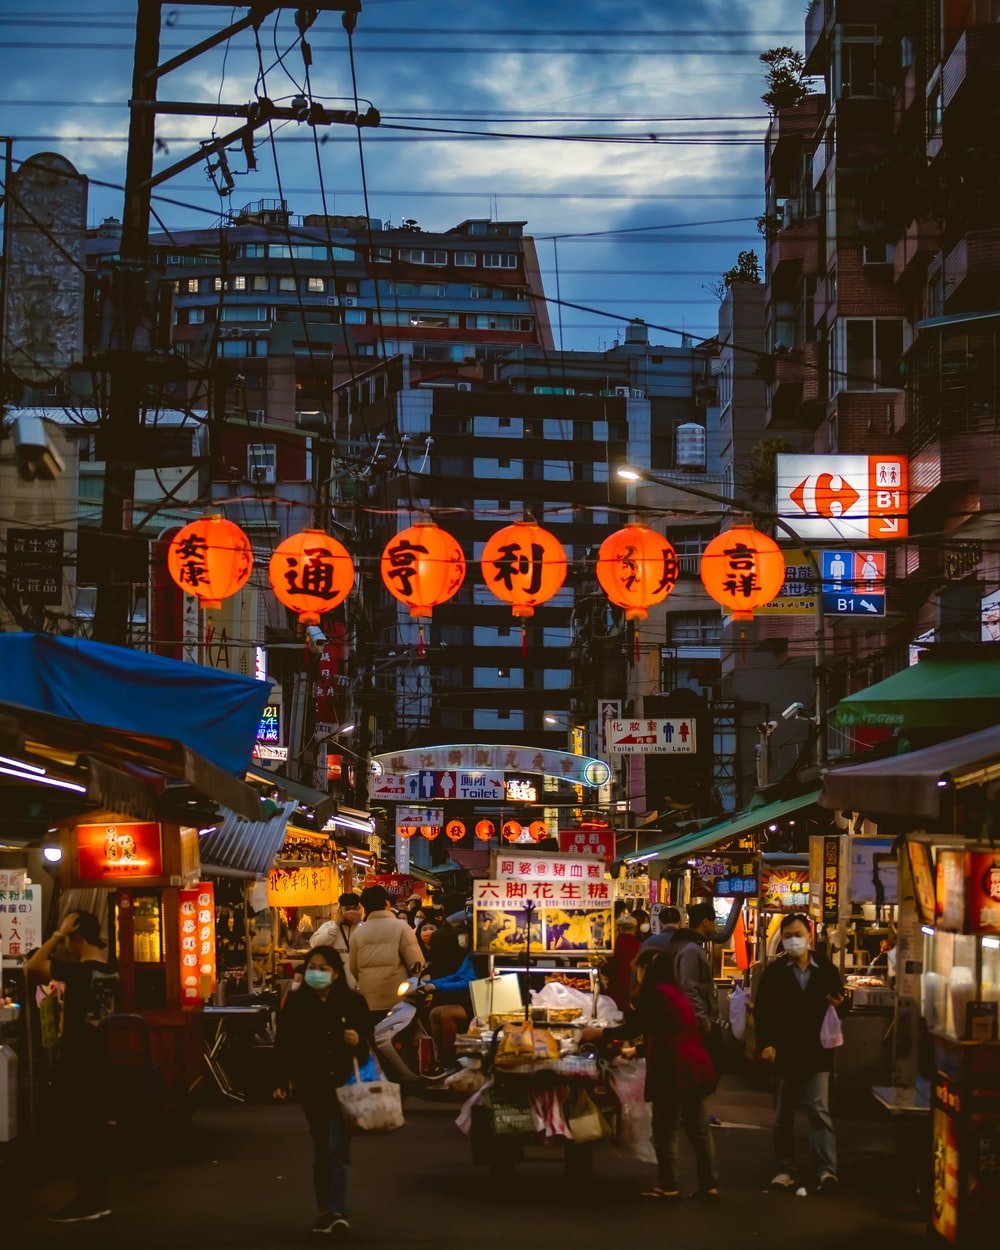 Taiwan Night Market Picture. Download Free Image